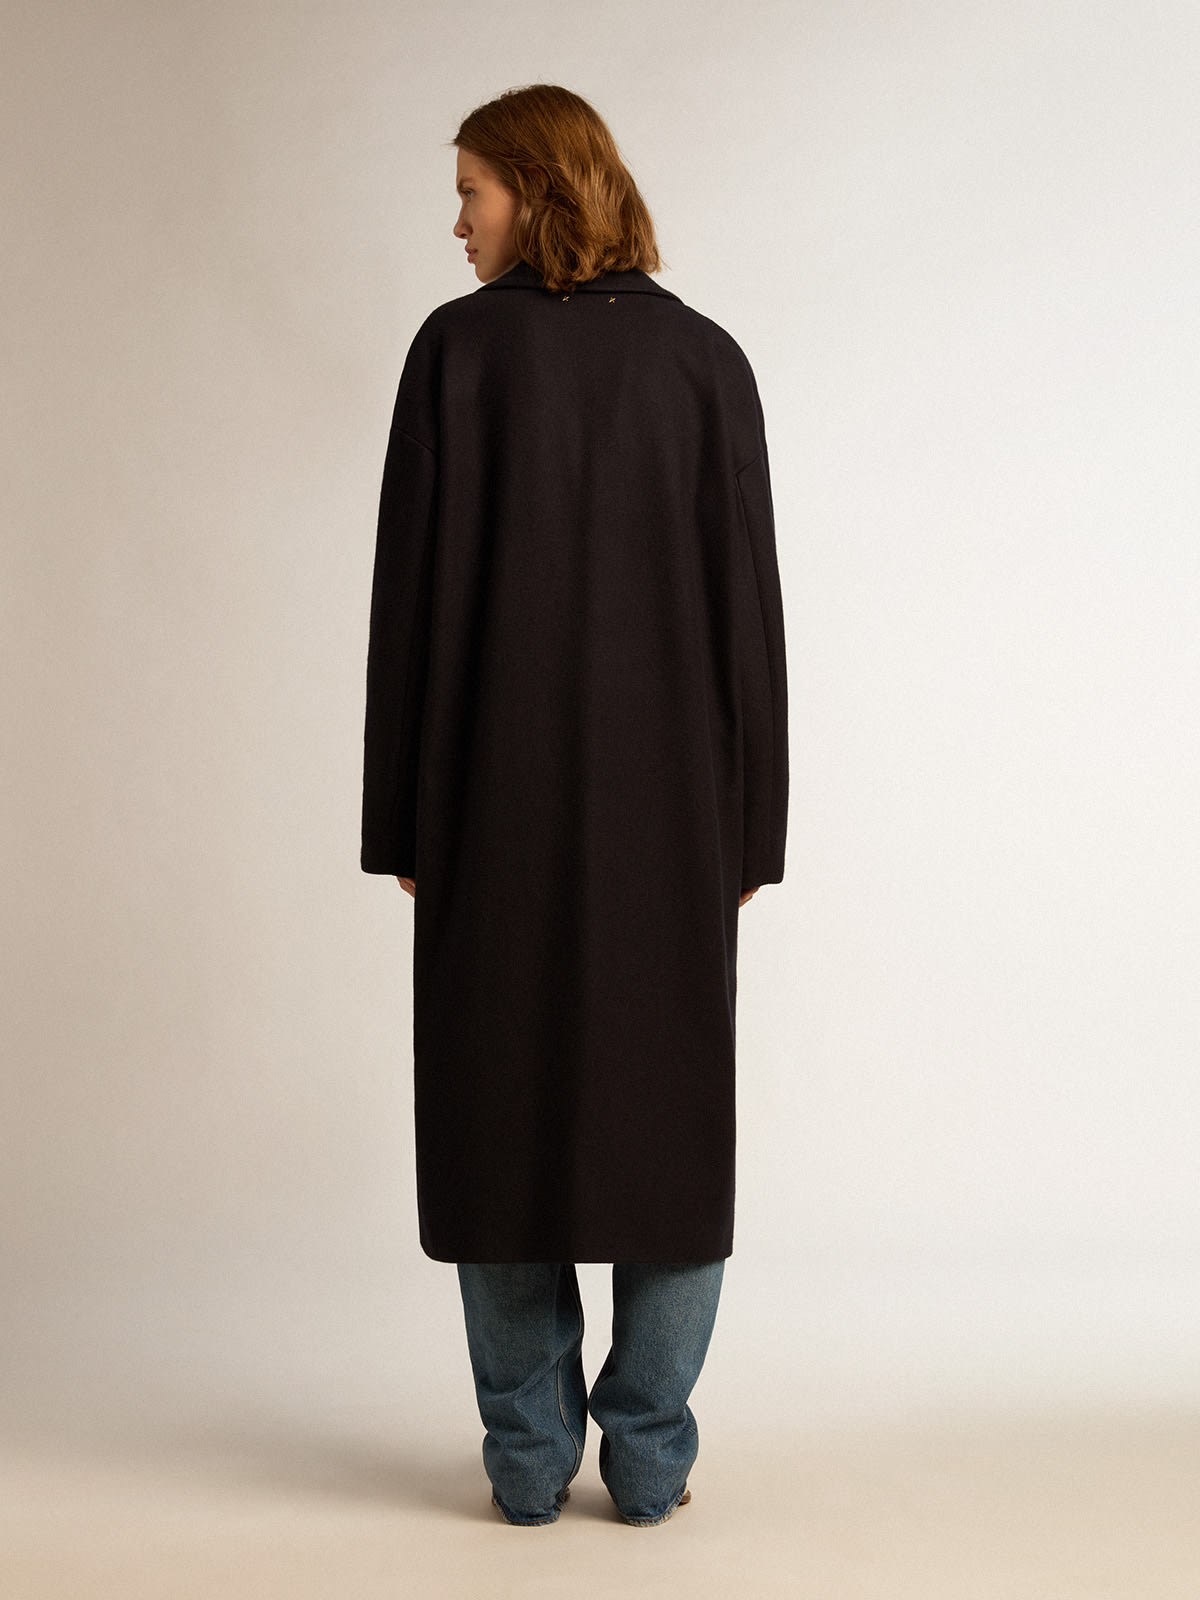 Golden Goose - Single-breasted cocoon coat in dark blue wool with gold-colored buttons in 